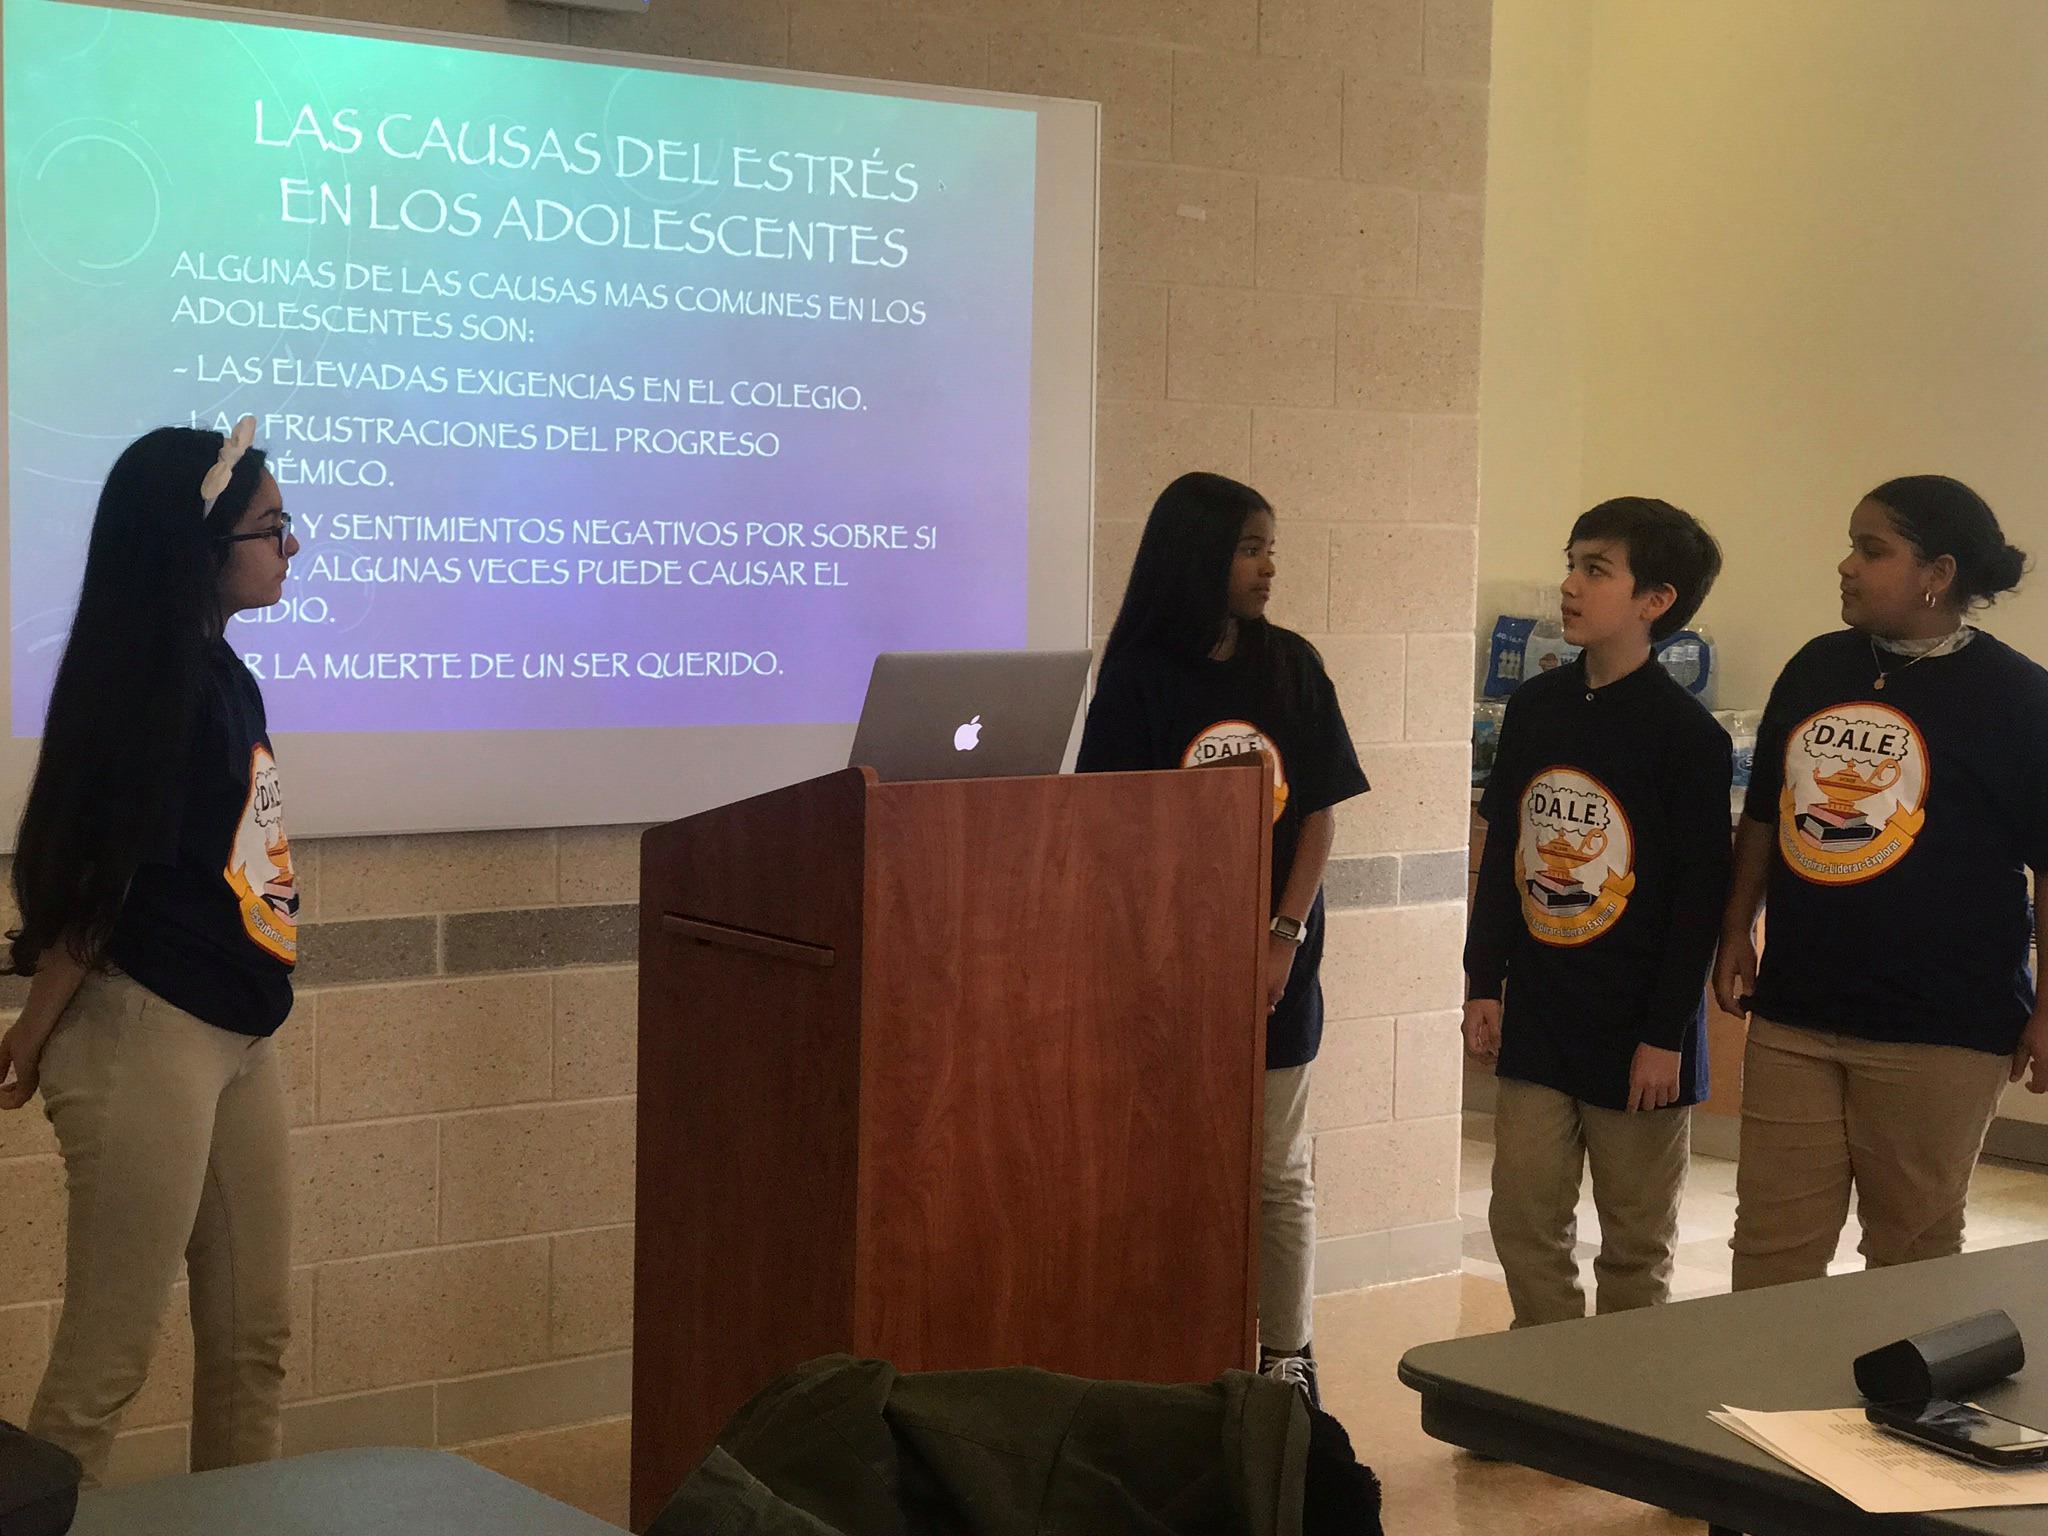 four kids wearing DALE T-shirt presenting a adolescents and stress presentations